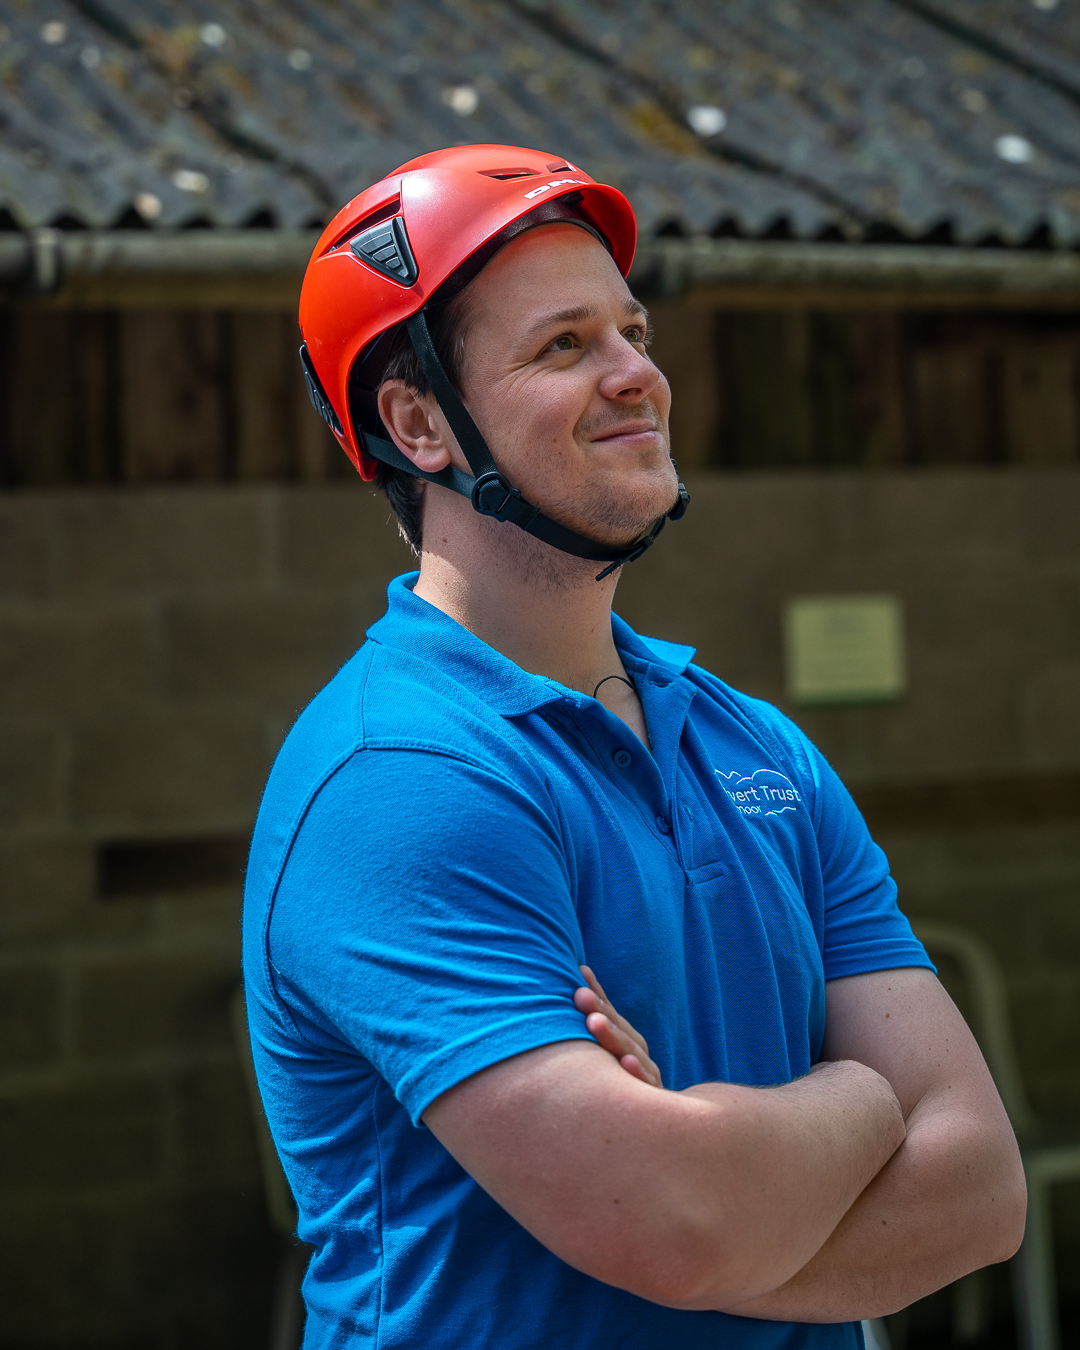 A man wearing a light blue Calvert Exmoor volunteering polo shirt and a red helmet has his arms crossed and his looking upwards and smiling at something out of frame.